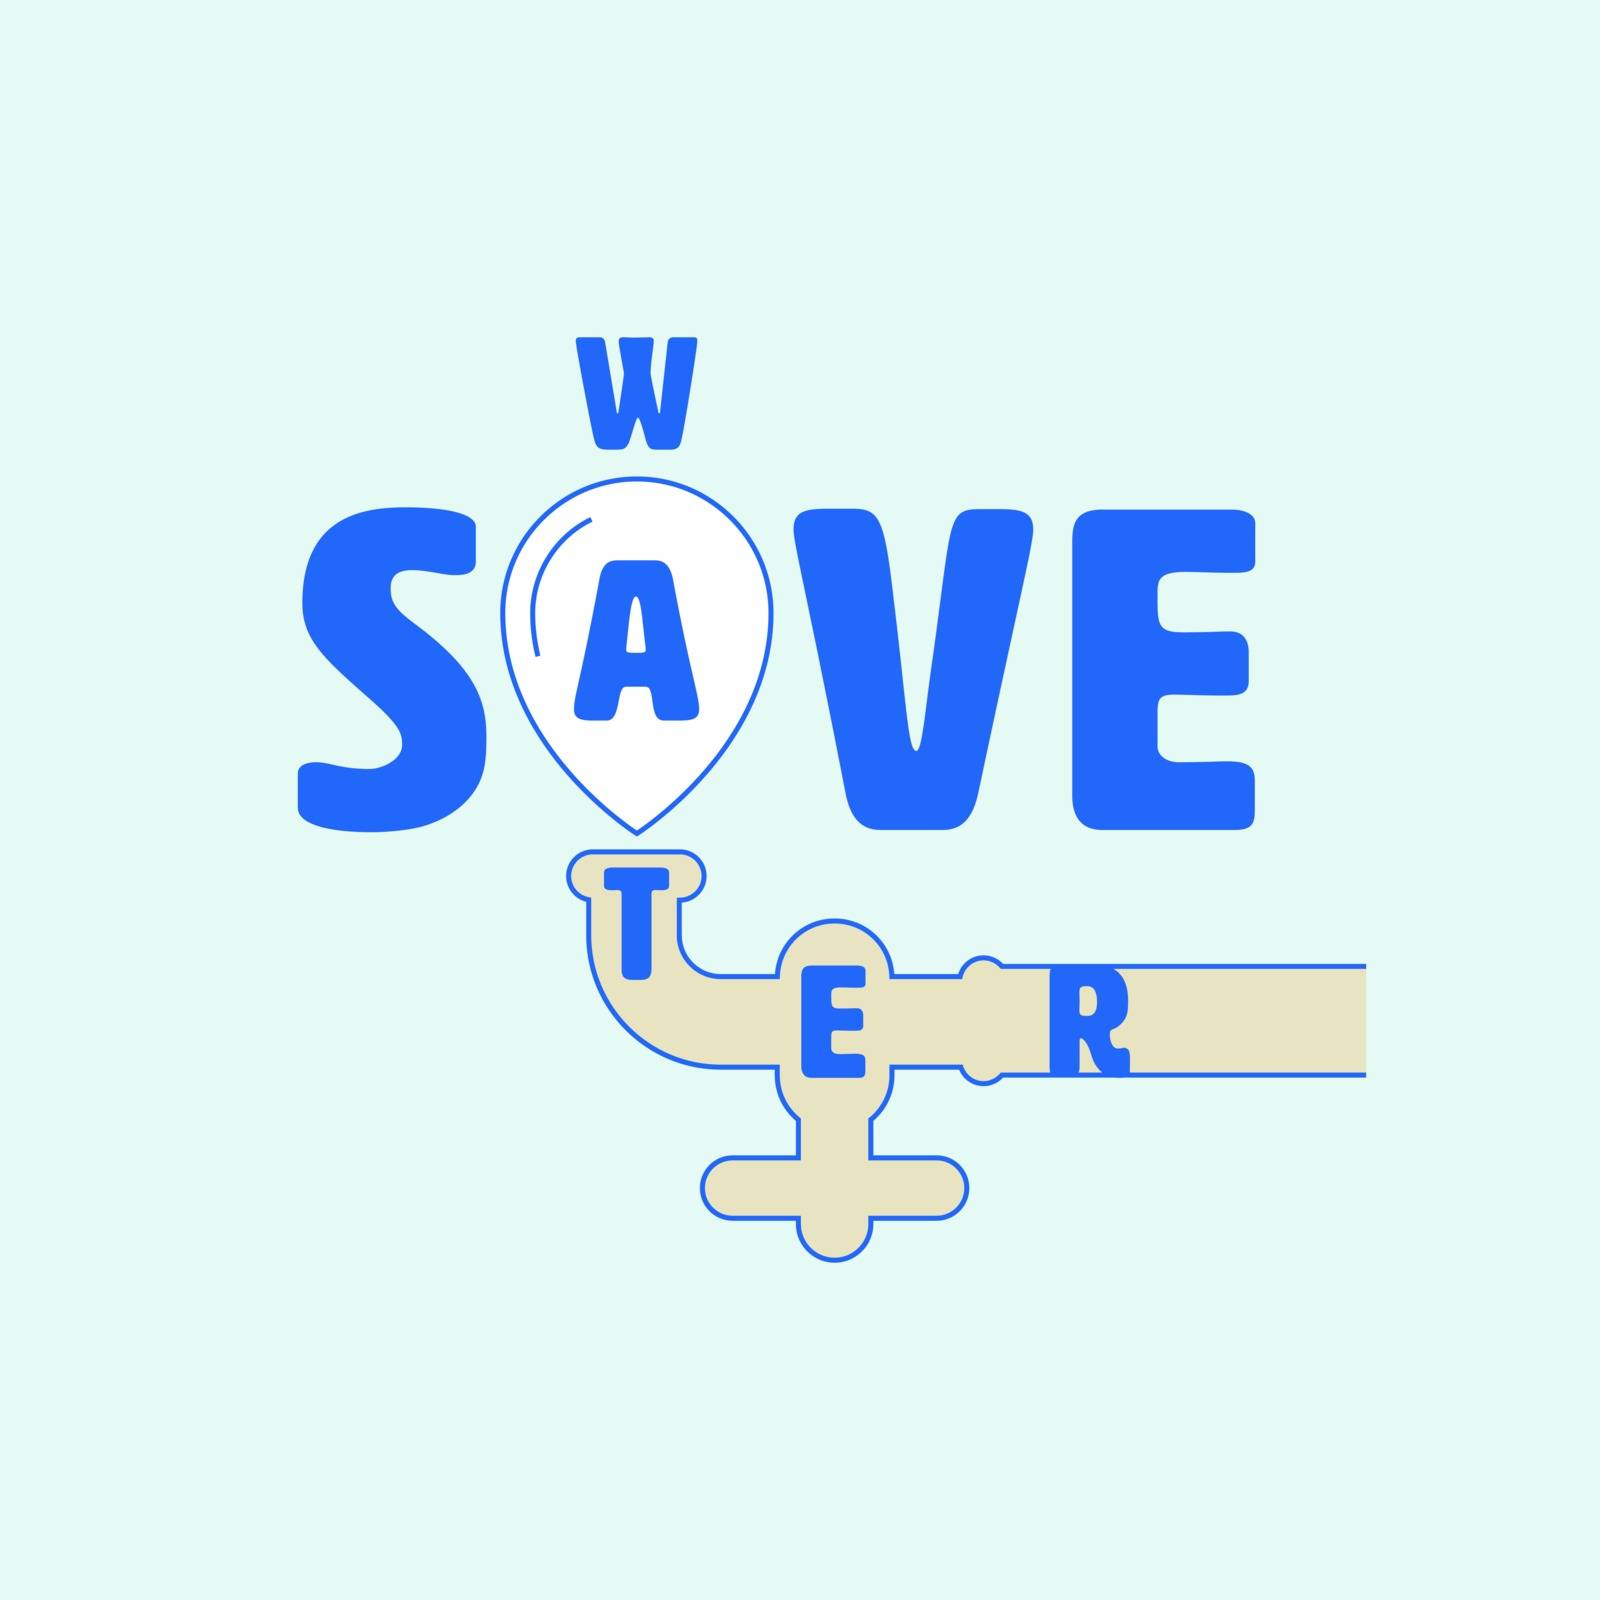 Save water typographic design with upside down water drop and tap as a gimmick. Water conservation concept. Vector illustration.